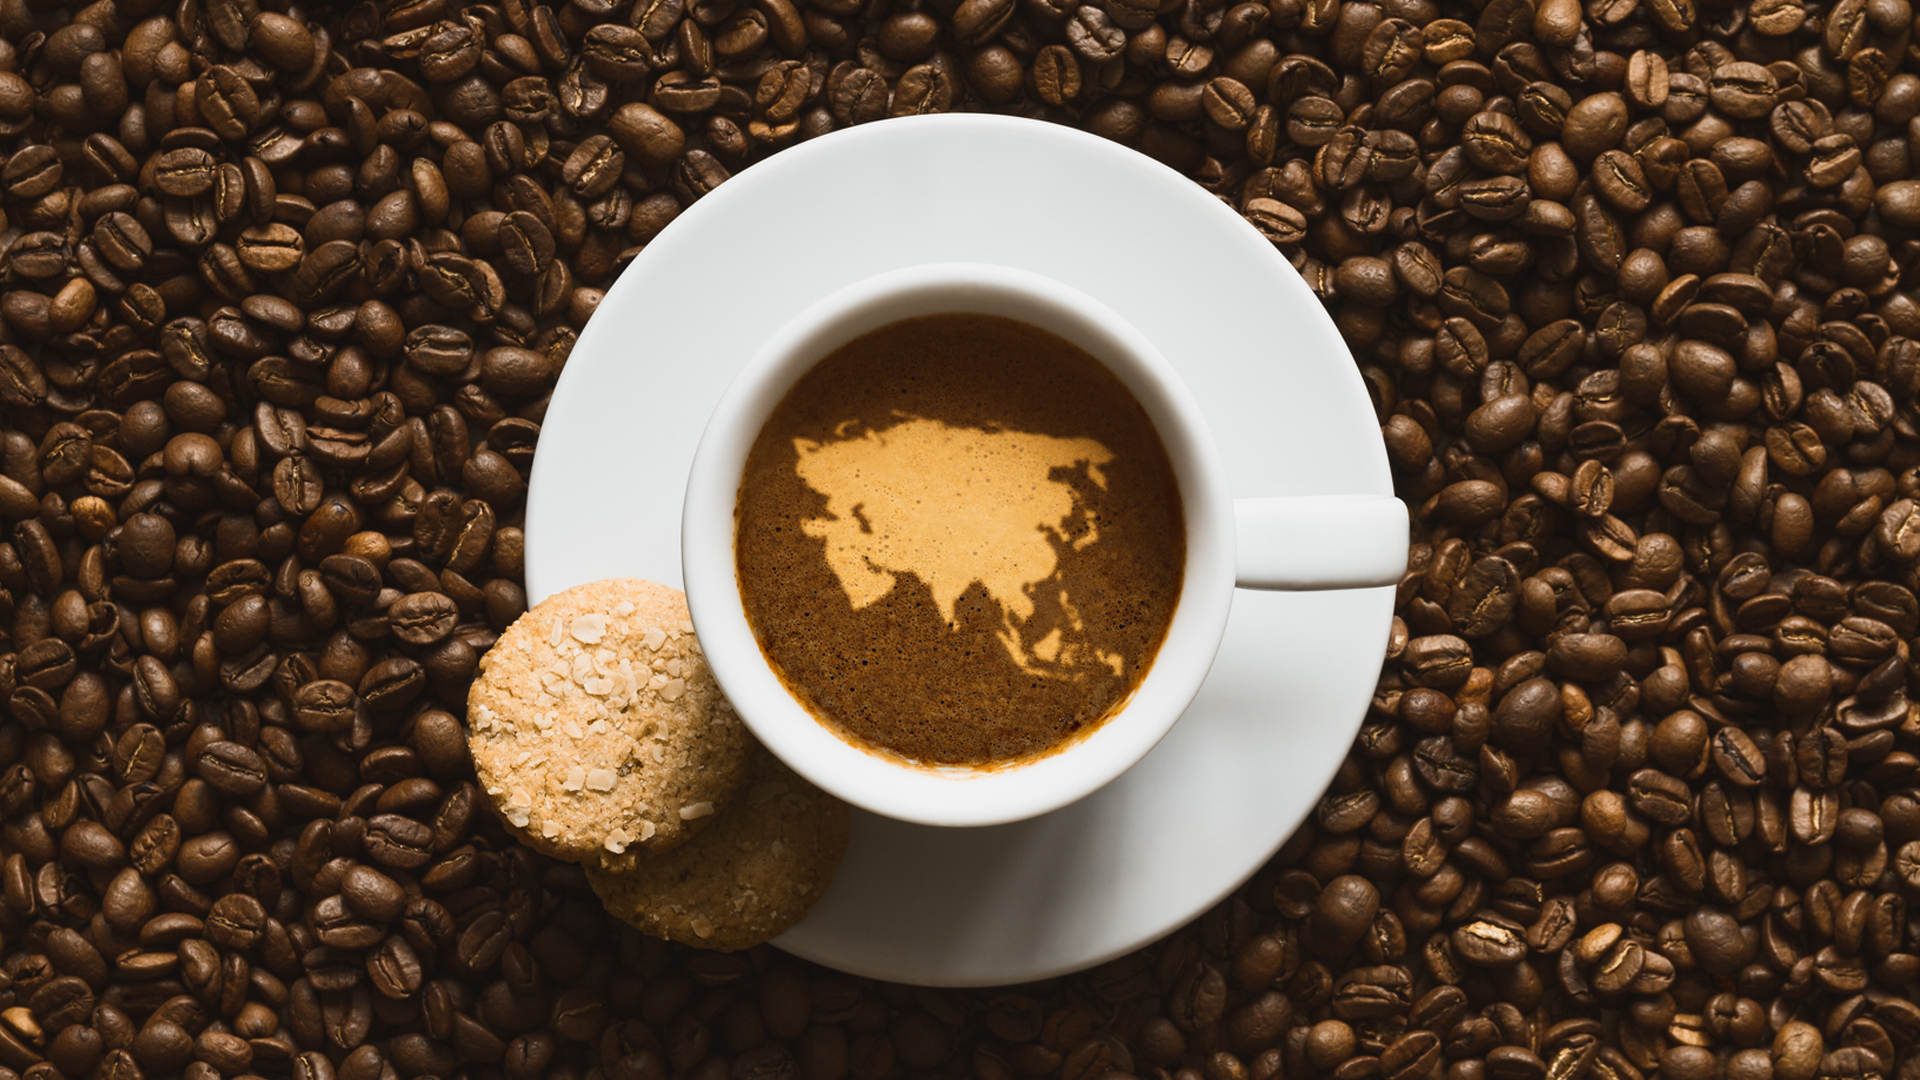 Coffee with map of Asia continent in the cup image for hero box